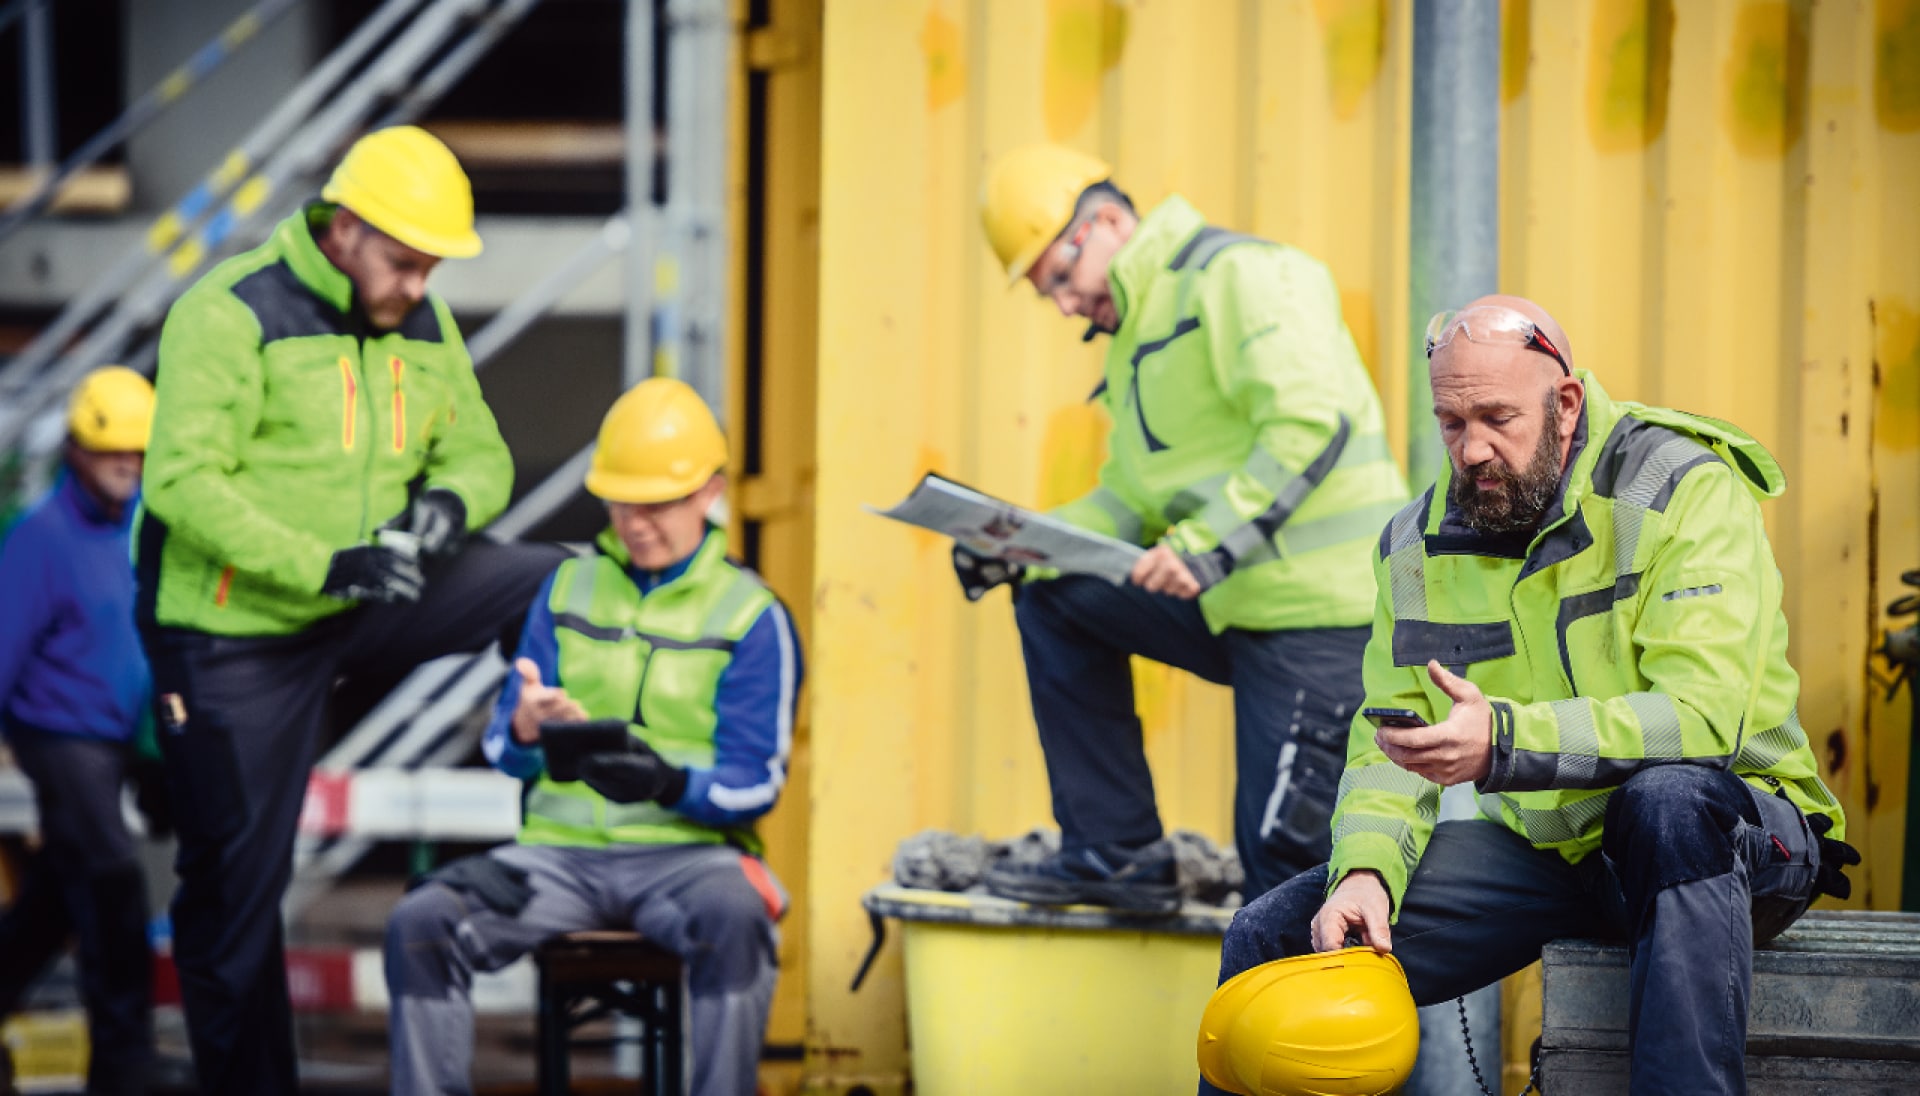 Jobsite employees experiencing downtime